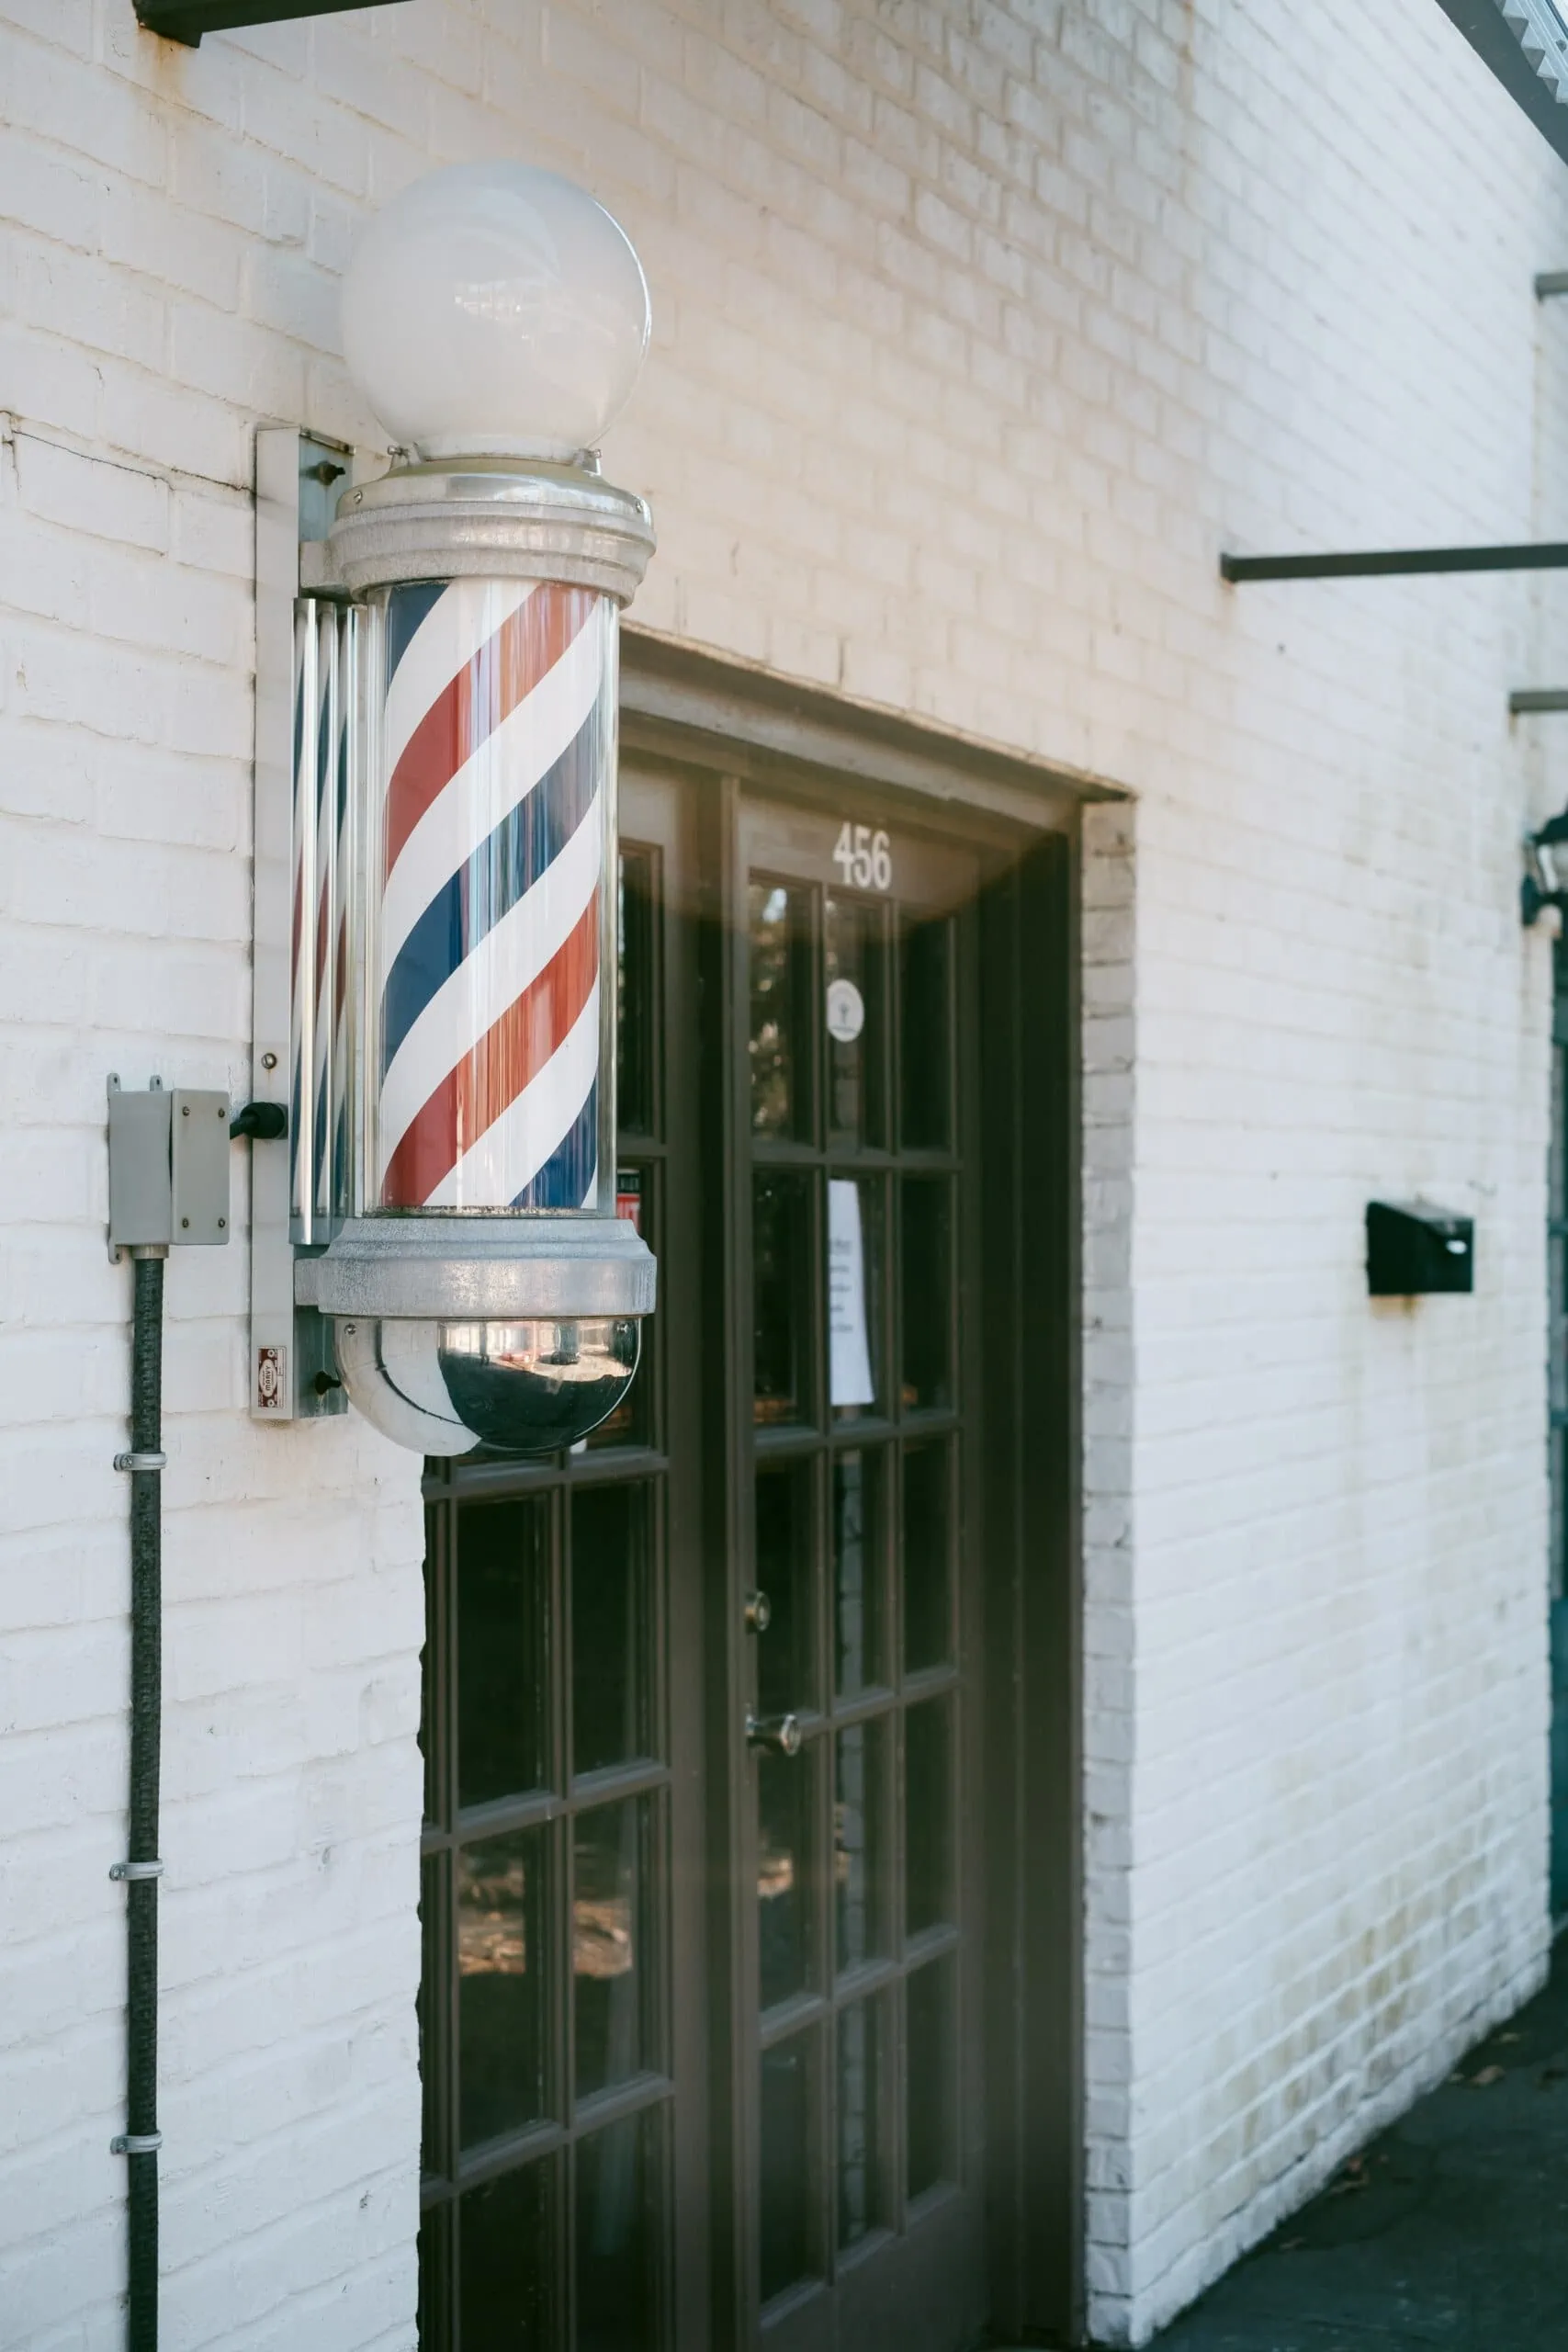 Barbershop entrance monitored by wireless access control